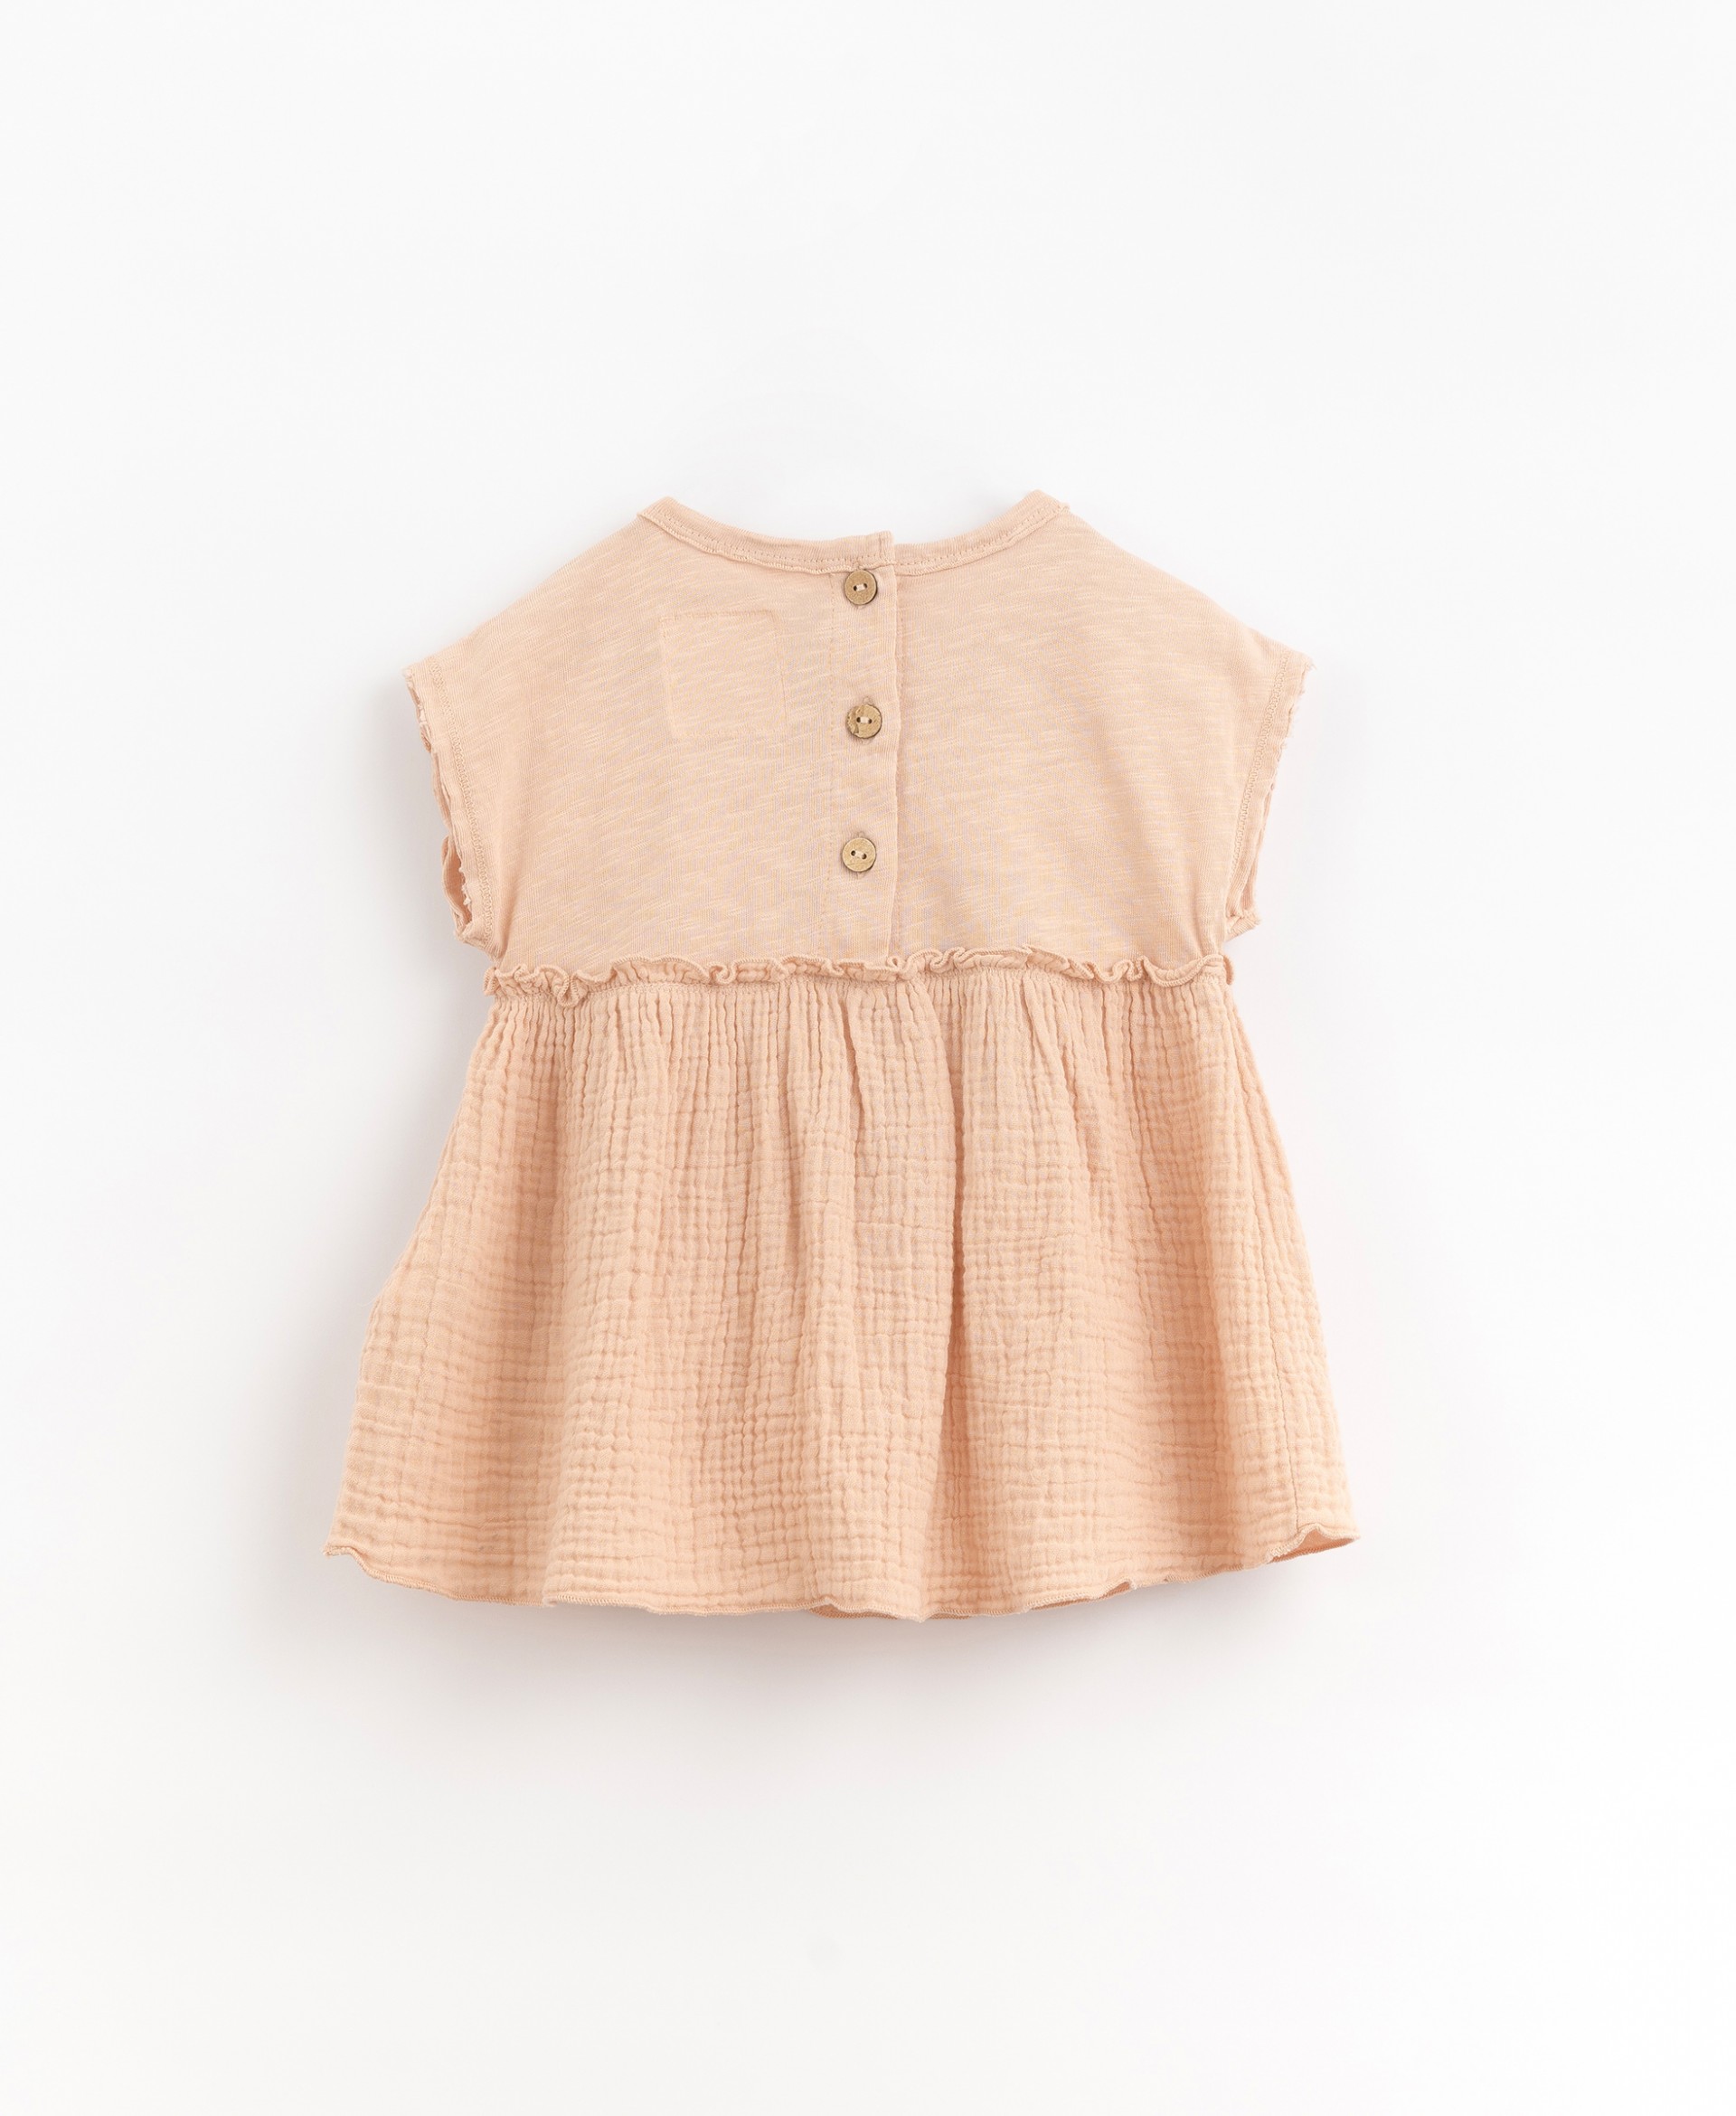 Dress with a mixture of knitwear and cloth | Organic Care